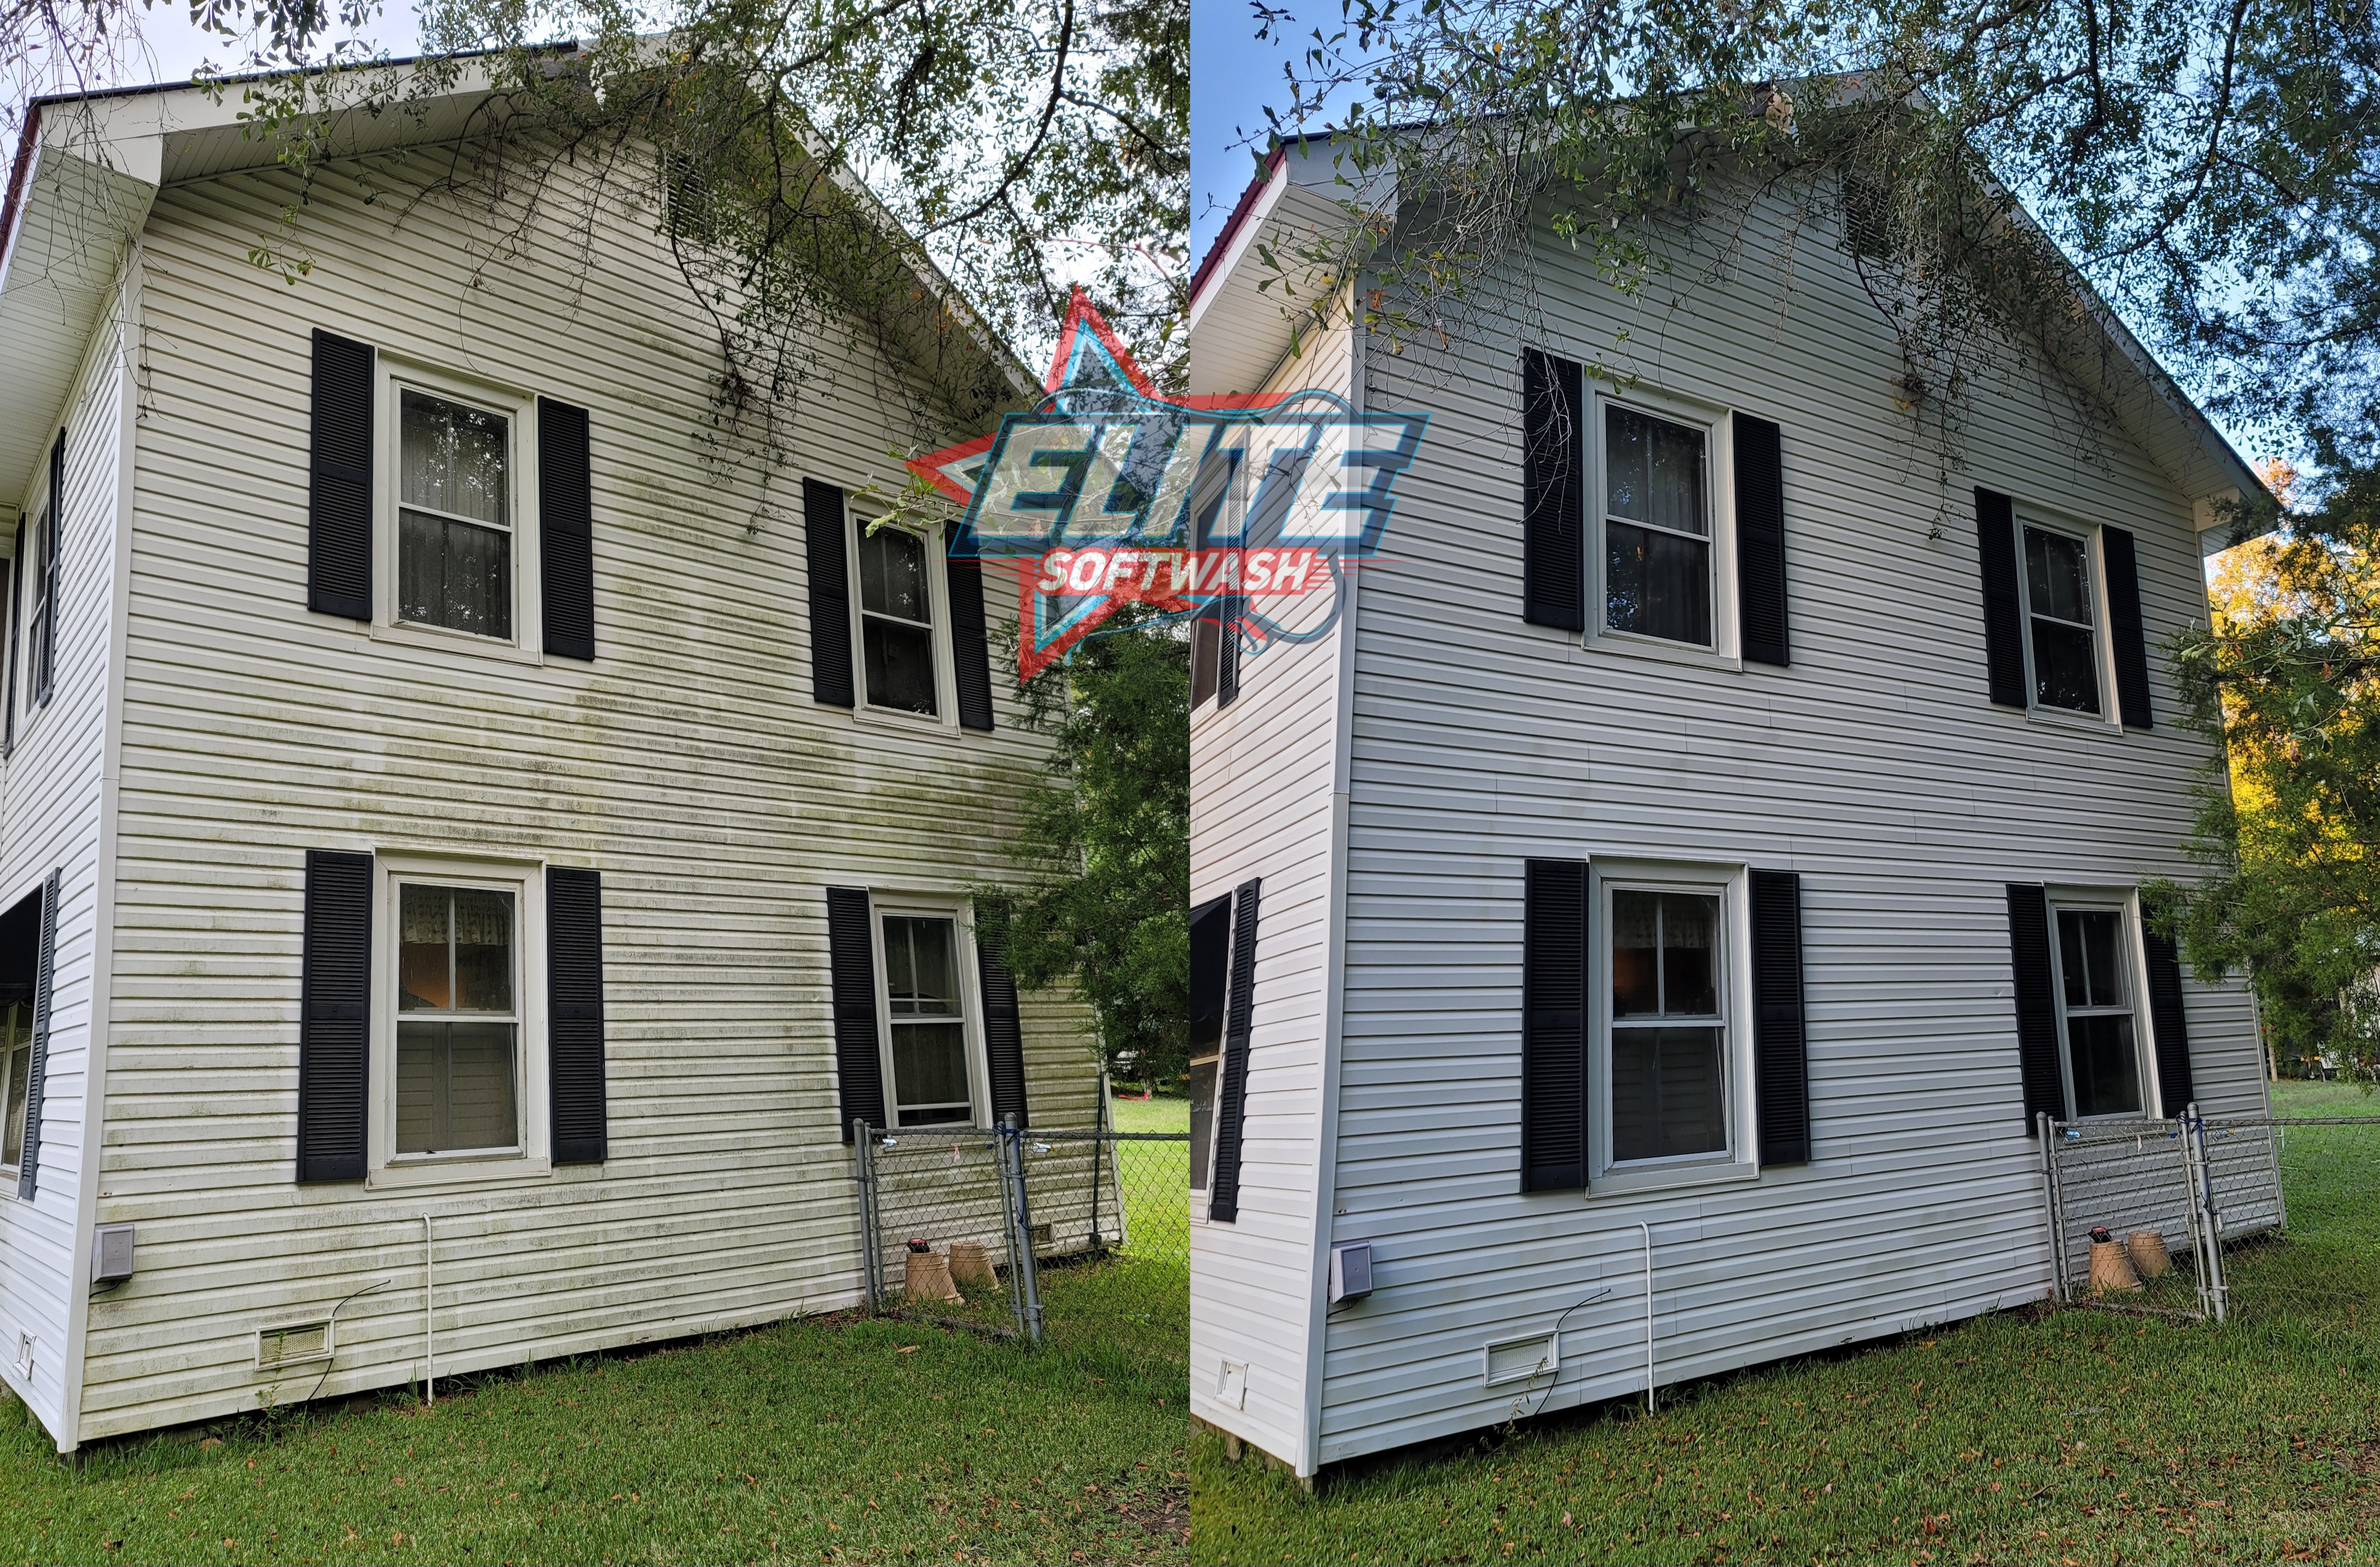 Top Quality Exterior Softwashing and Pressure Cleaning Performed in Moncks Corner South Carolina! Image